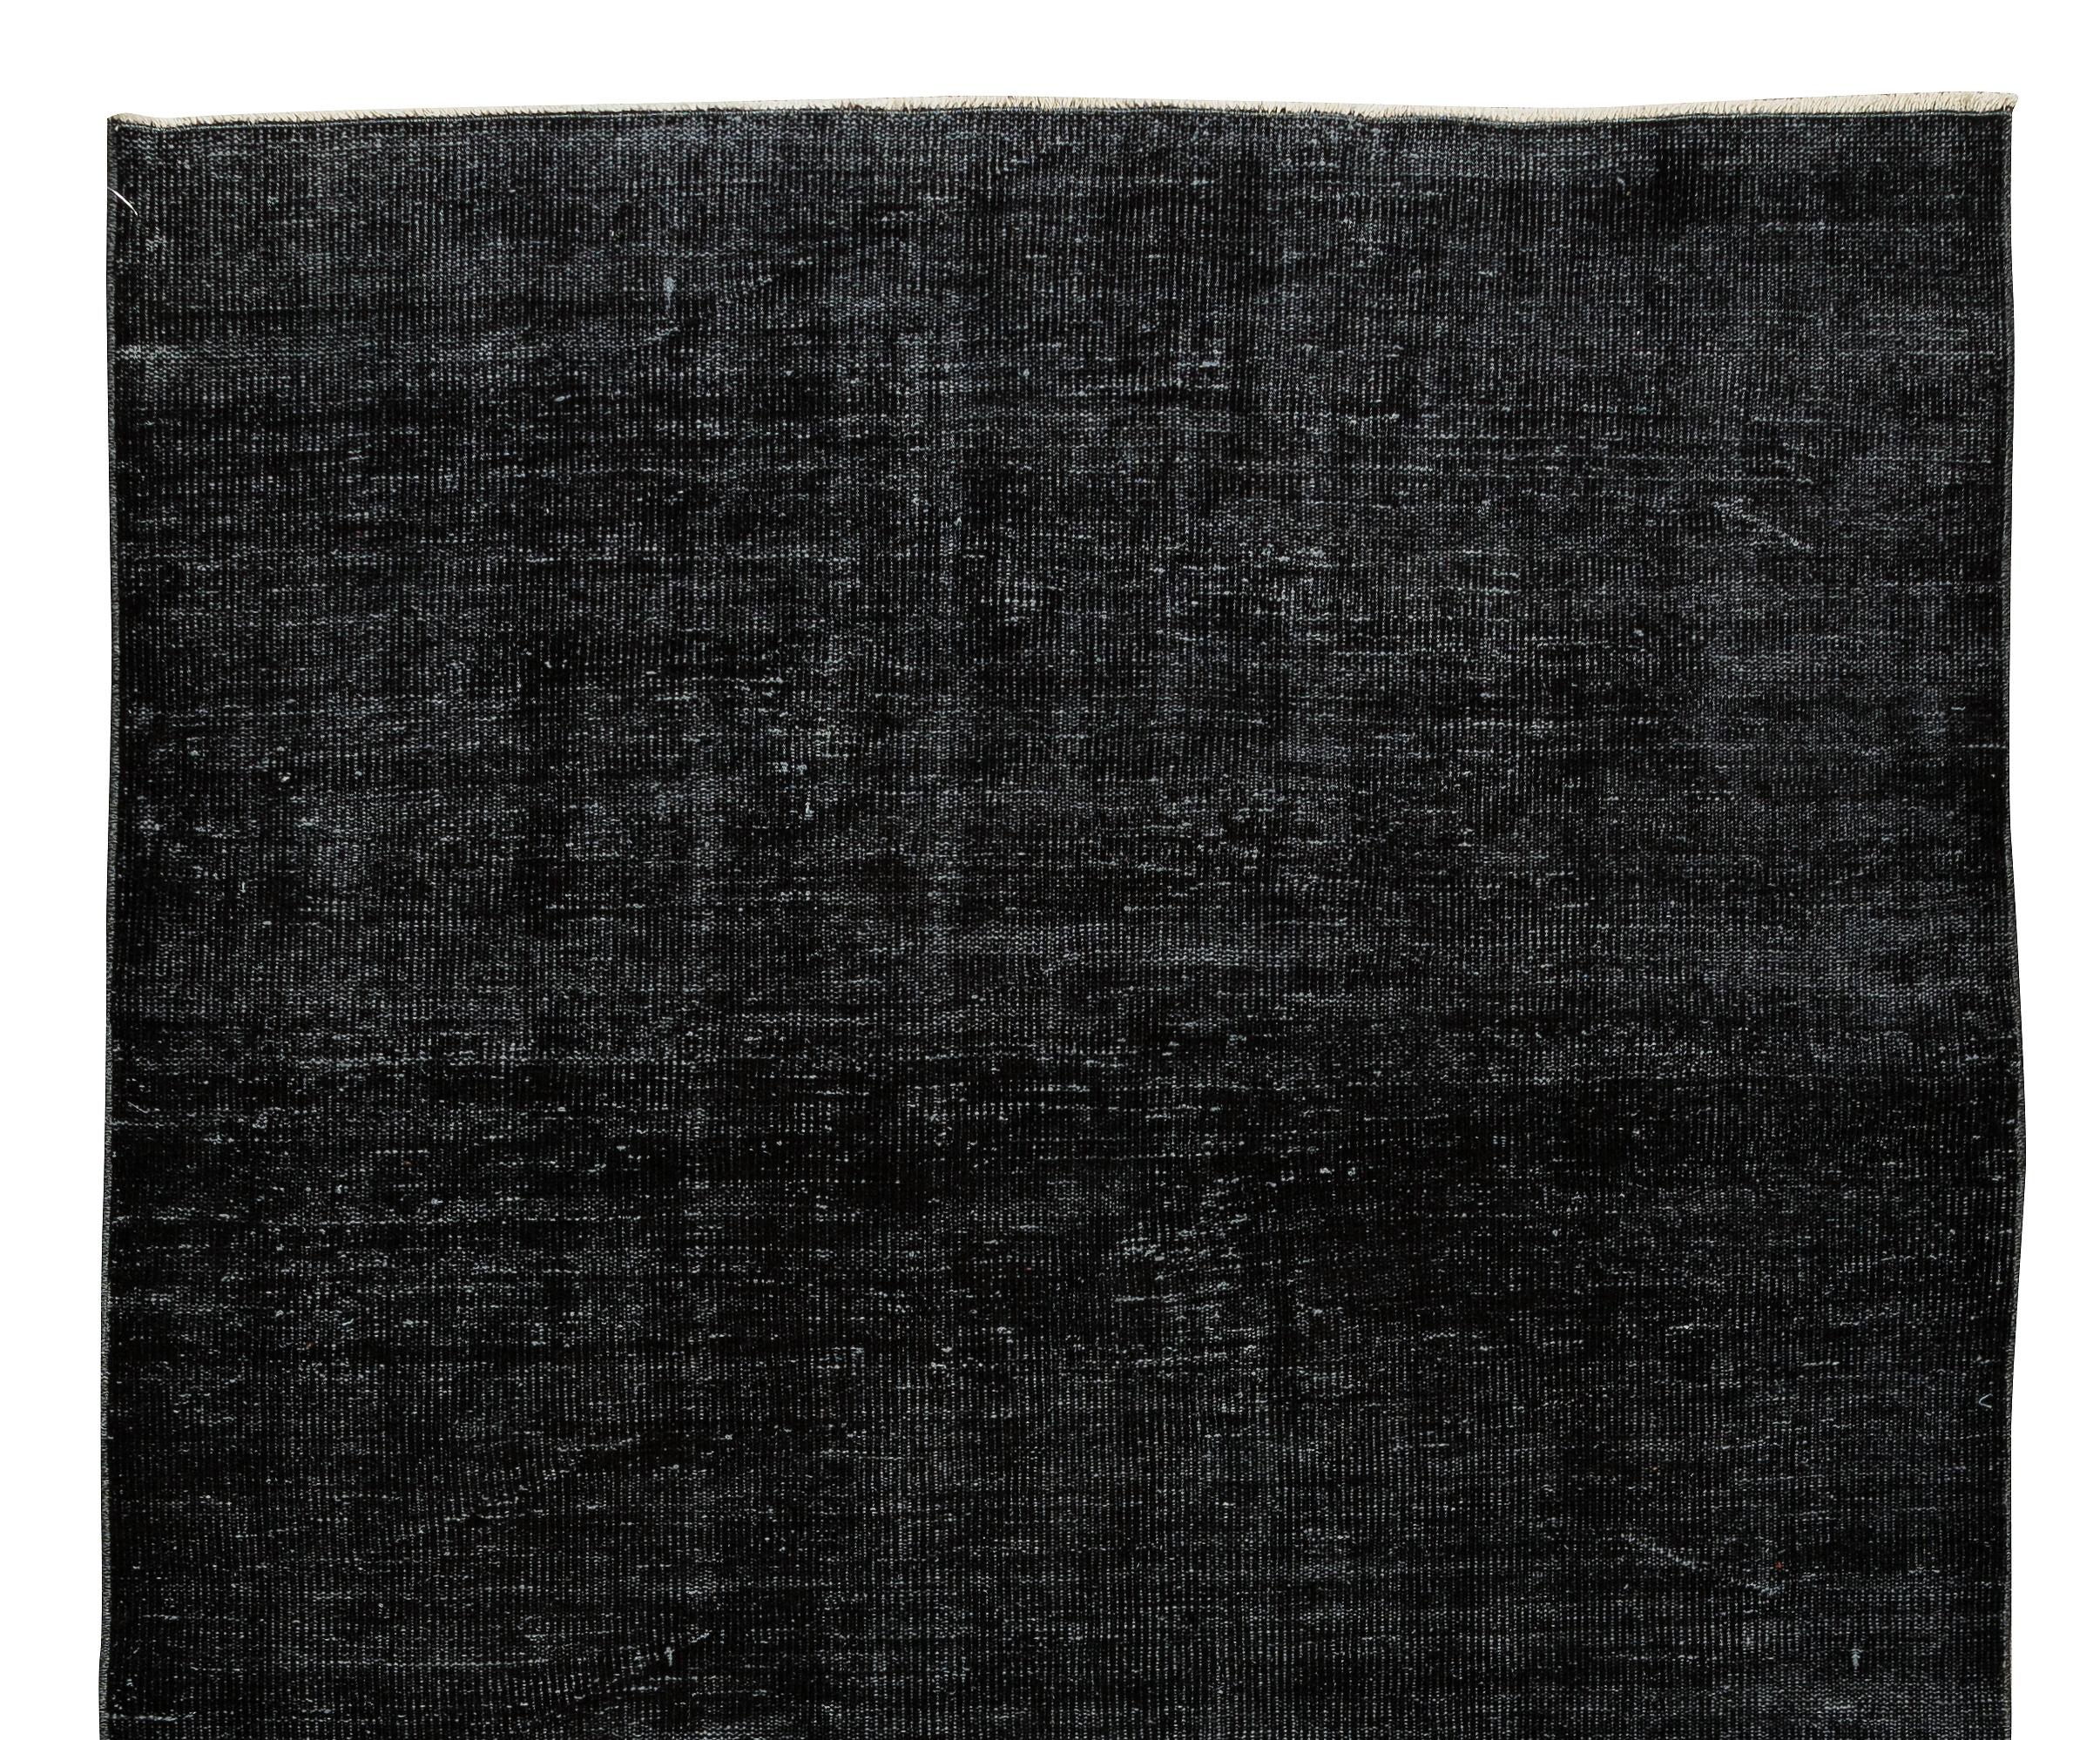 Turkish 5.5x9.2 Ft Solid Black Area Rug made of wool and cotton, Hand-Knotted in Turkey For Sale